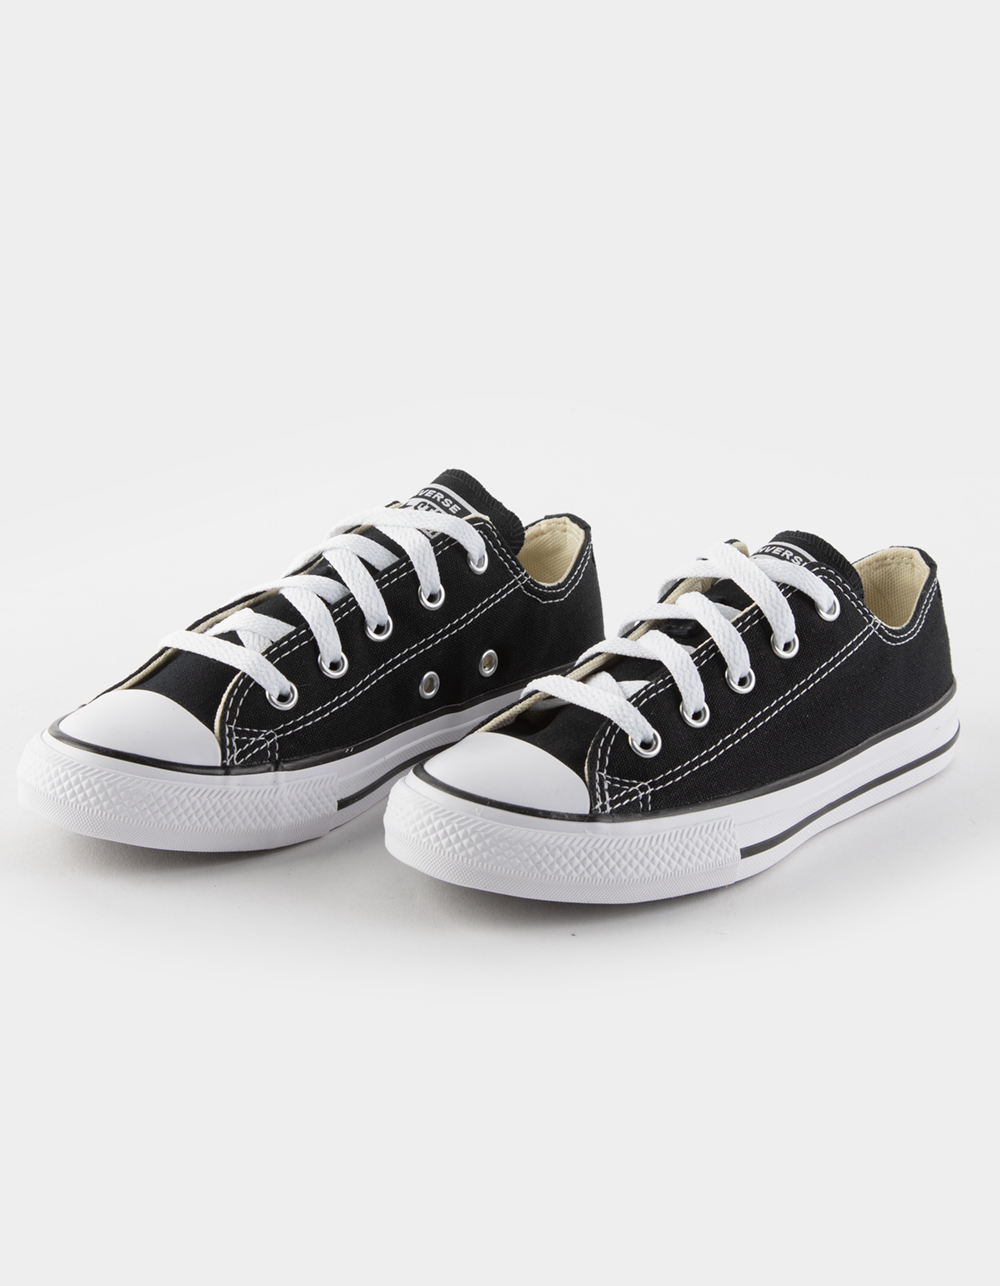 Converse Shoes & Converse Clothing | Tillys